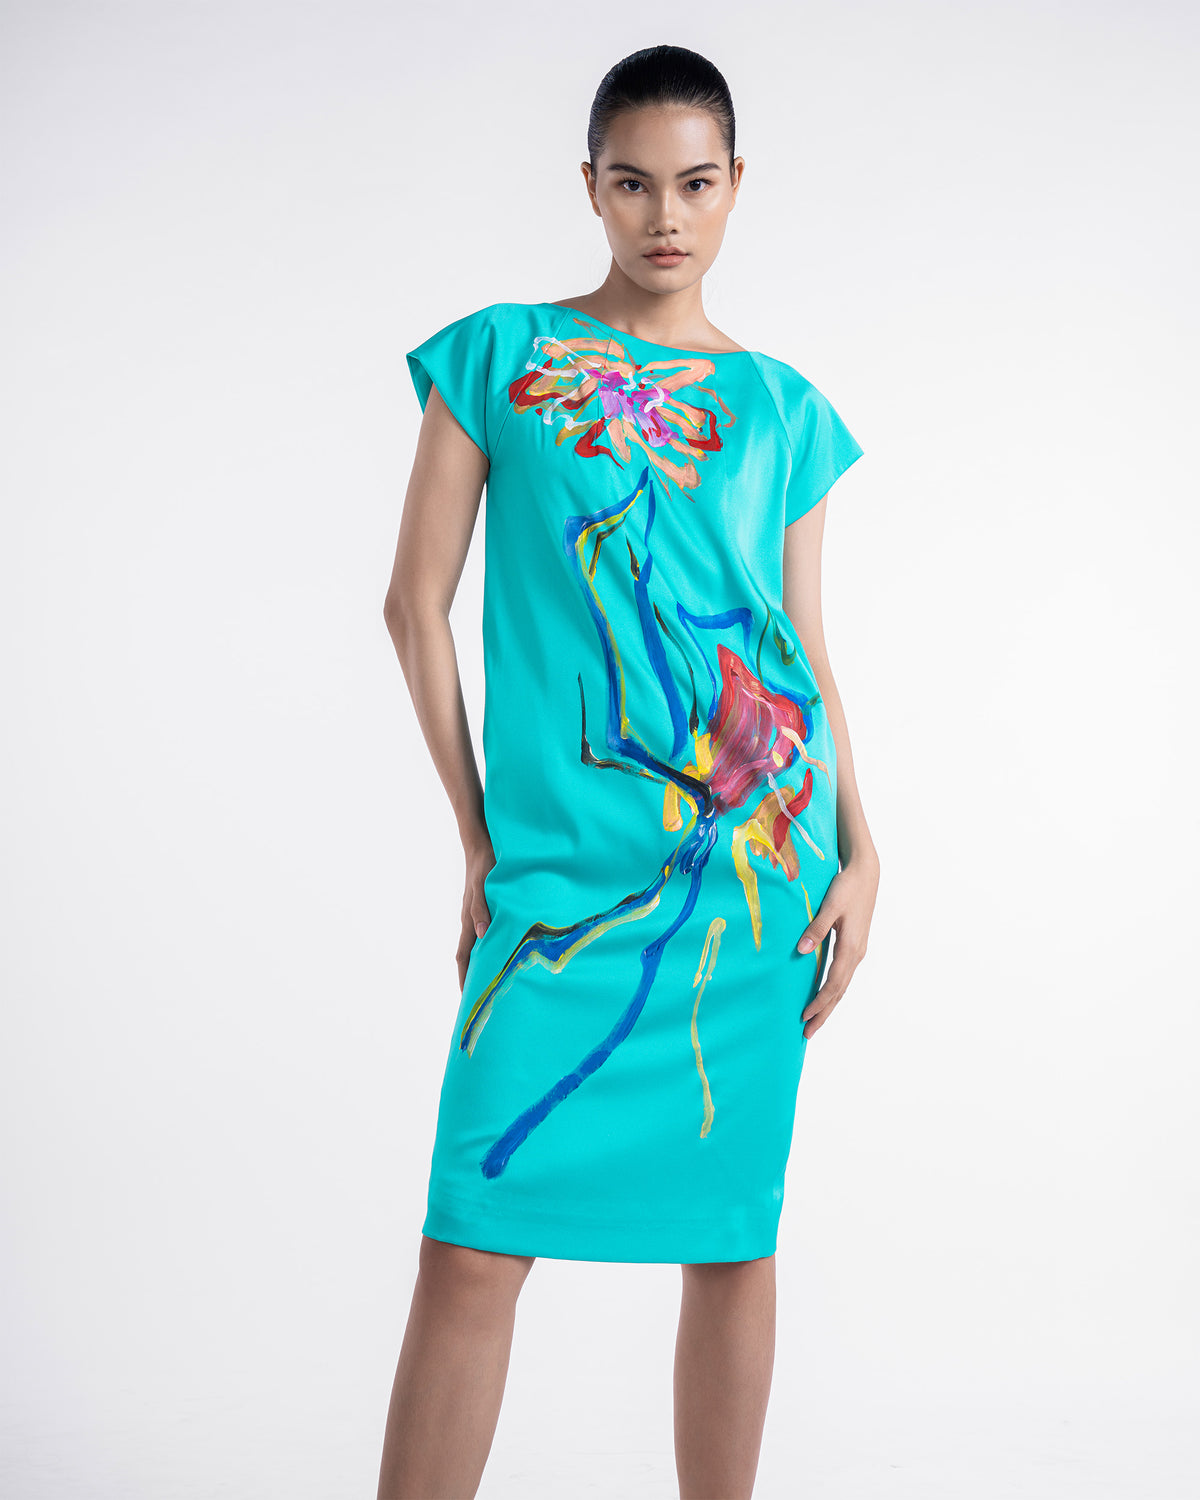 Spontaneous - Turquoise Cocoon Dress